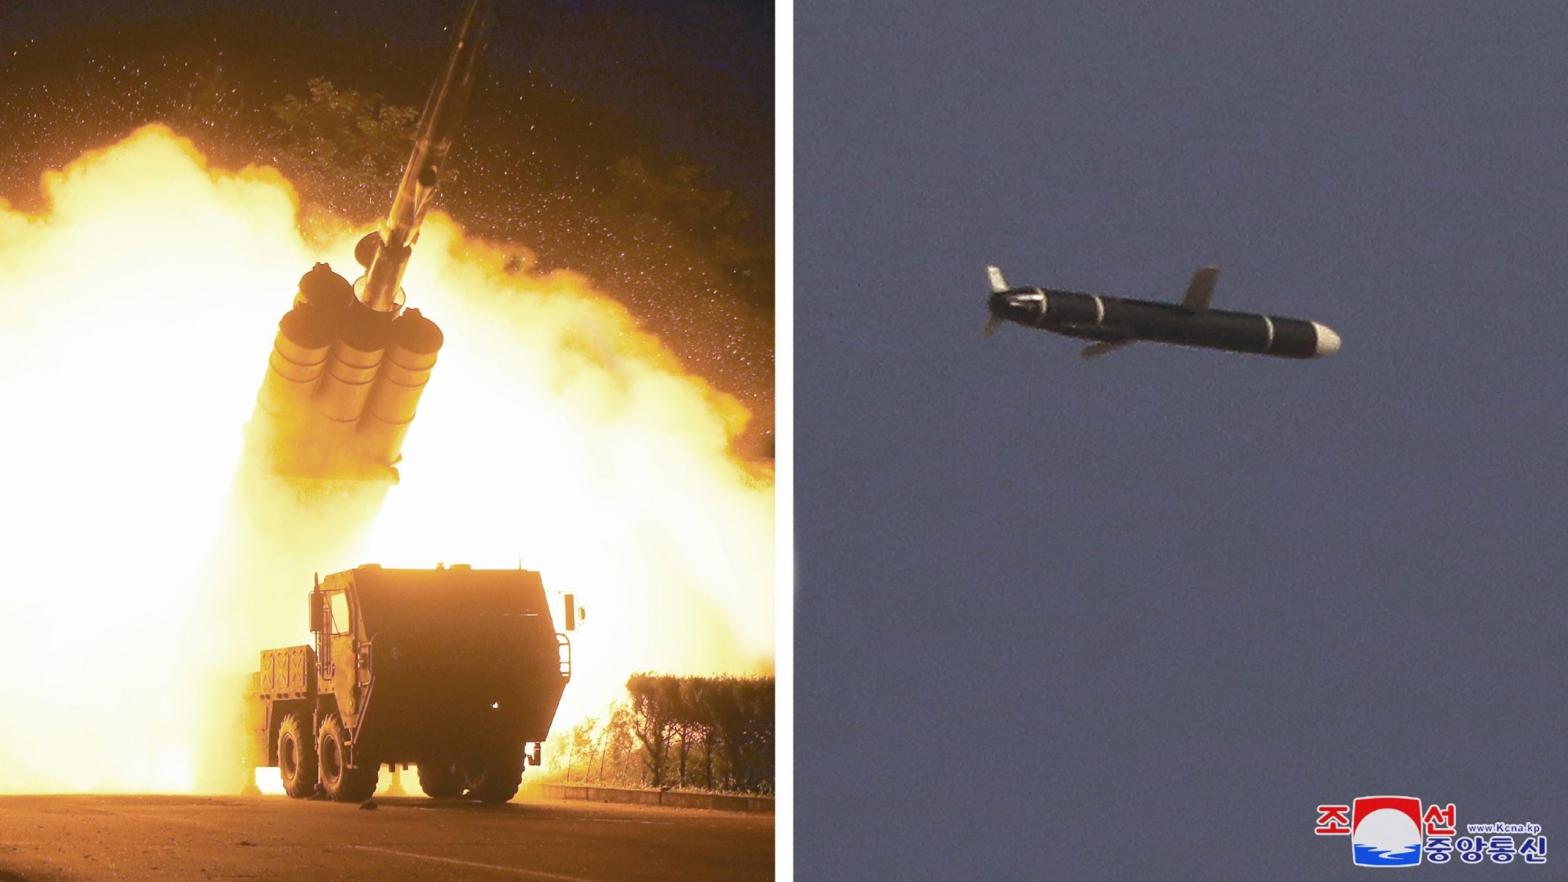 Photos provided by the North Korean government on  Sept. 13, 2021, show long-range cruise missiles tests held on  Sept. 11 -12, 2021 in an undisclosed location of North Korea. (Photo: Korean Central News Agency/Korea News Service via AP, AP)